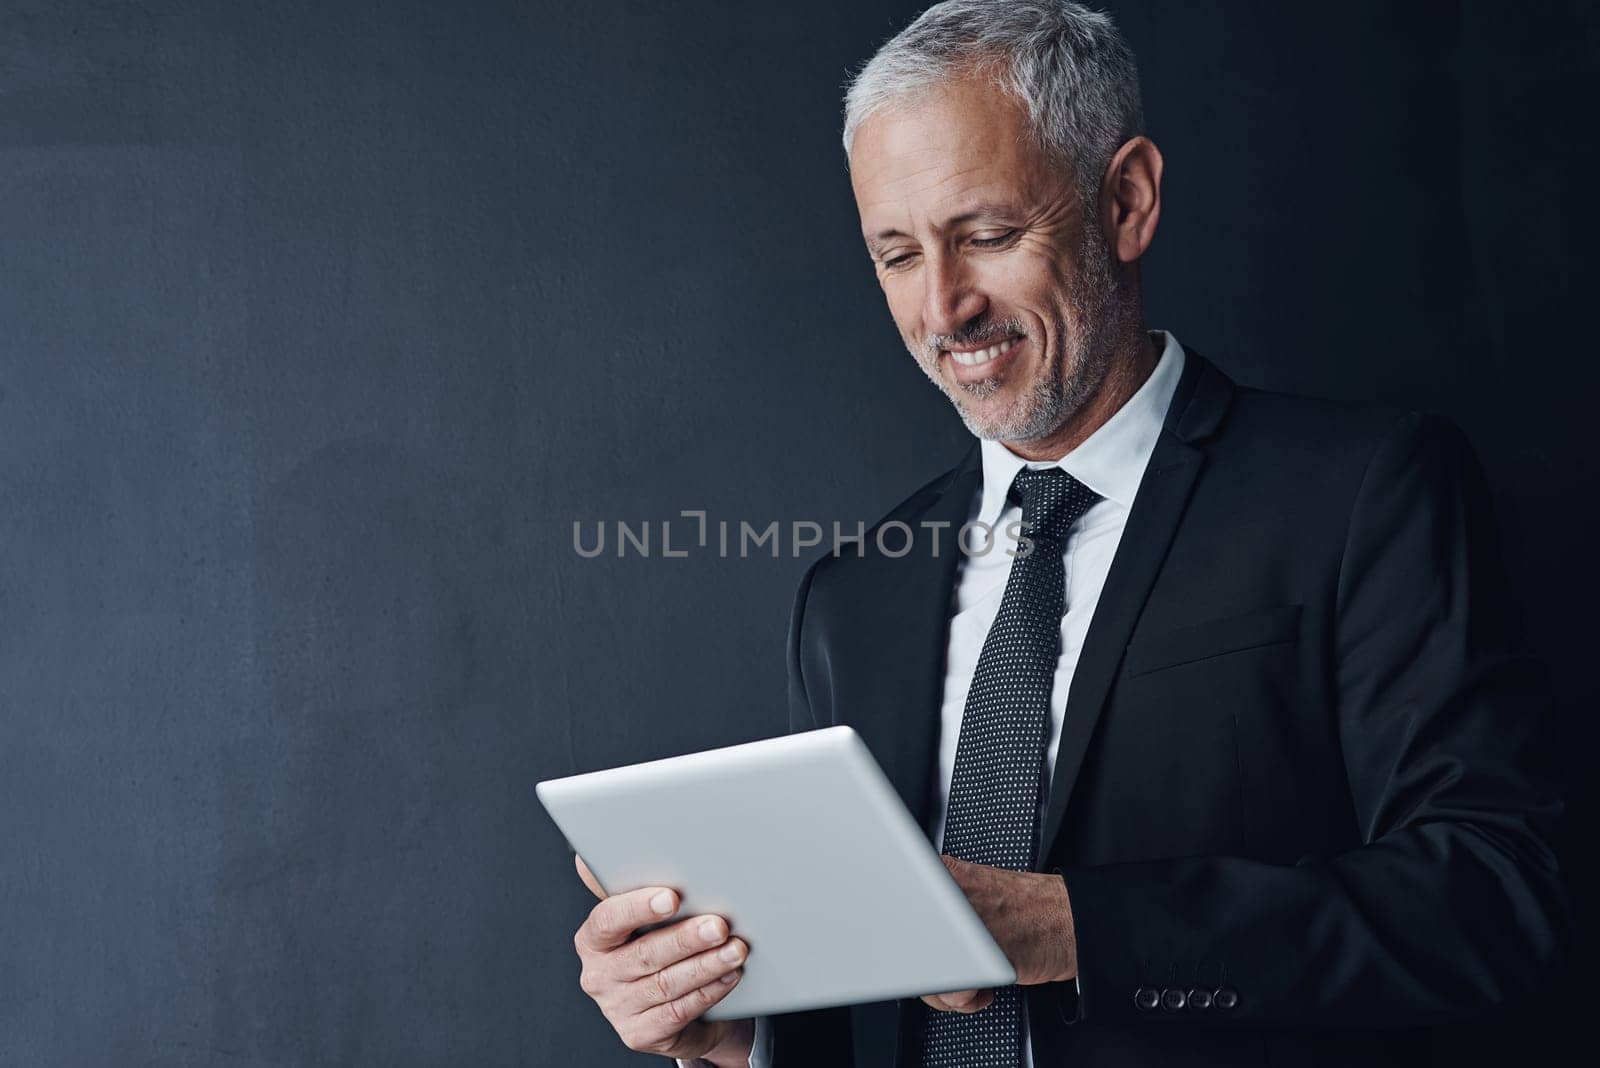 Smart technology is a staple for the business savvy. Studio shot of a mature businessman using a digital tablet against a dark background. by YuriArcurs